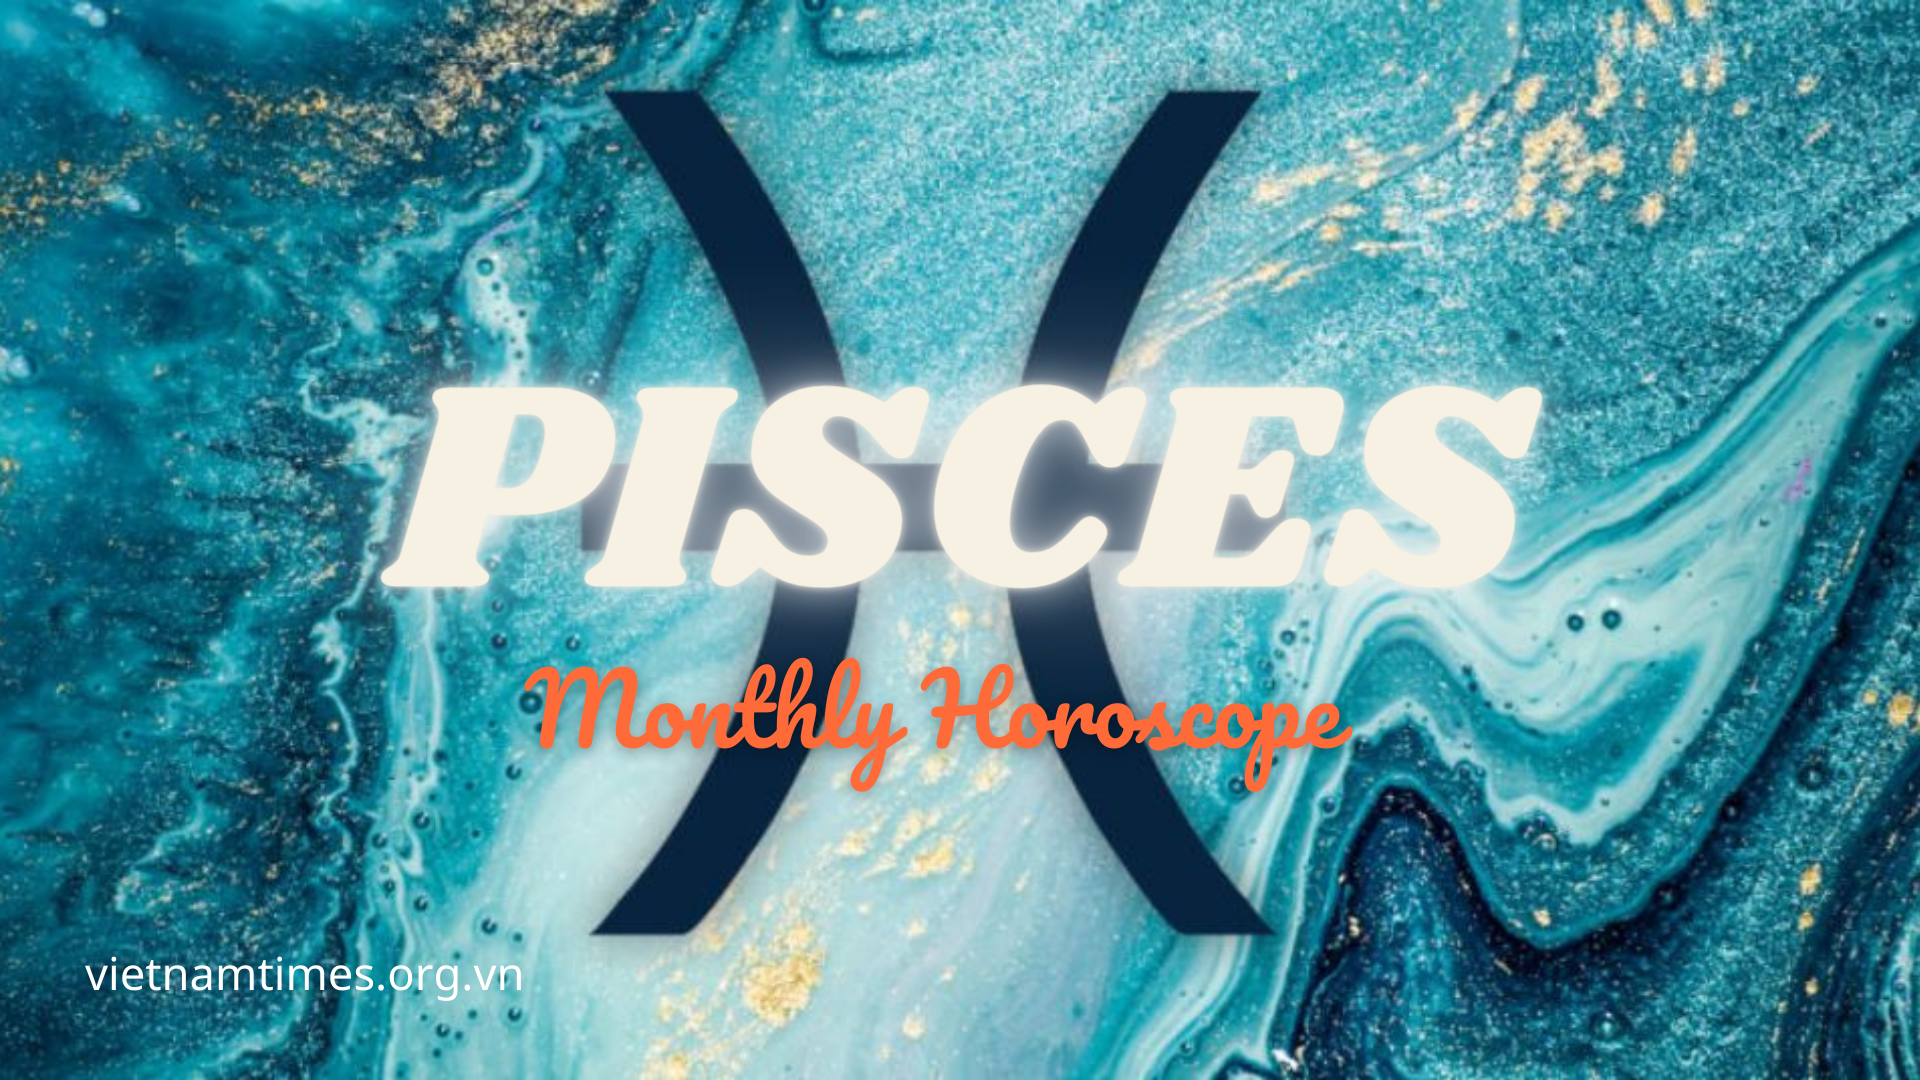 Pisces Horoscope November 2021: Monthly Predictions for Love, Financial, Career and Health